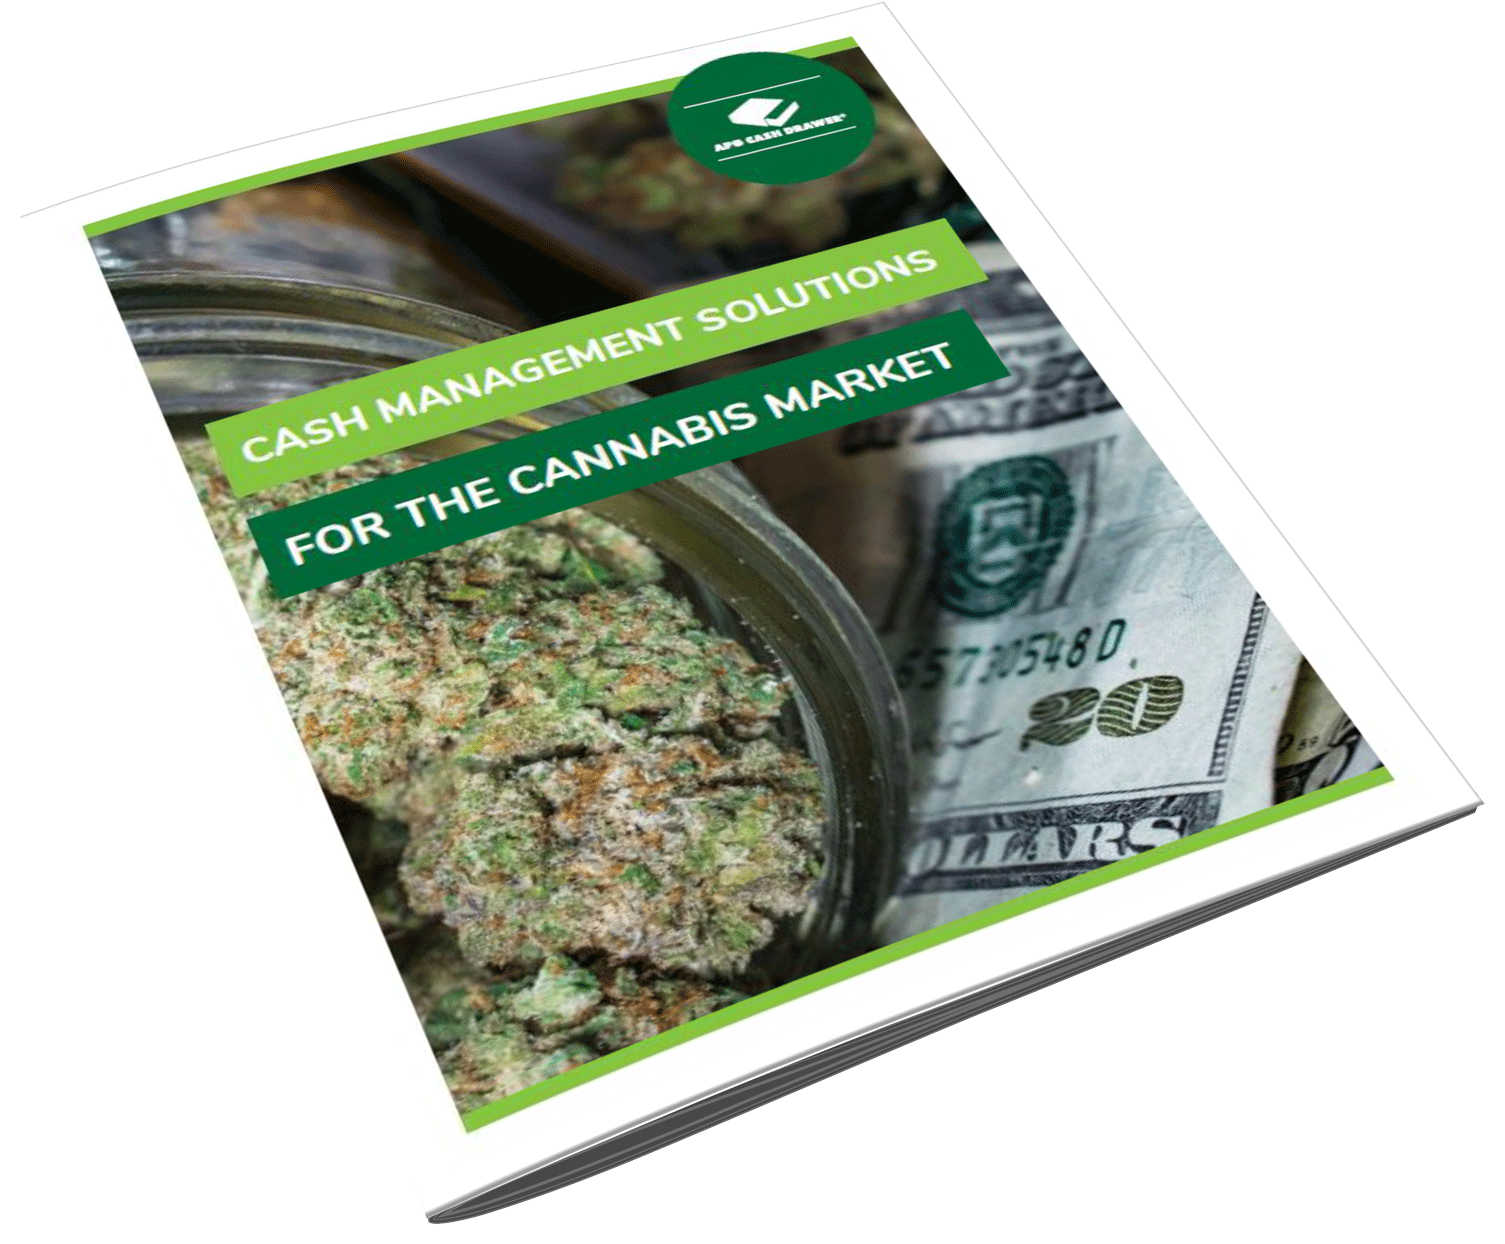 Cash Management Solutions for the Cannabis Market